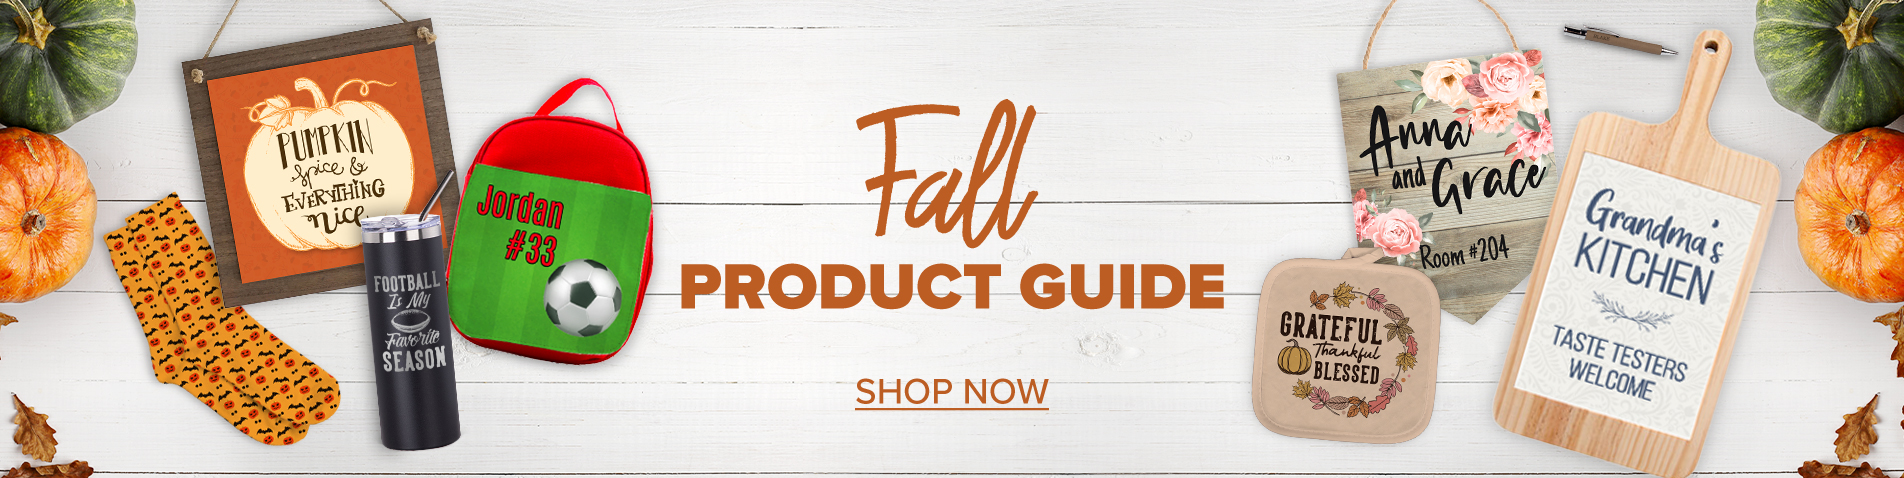 Fall Product Guide Shop Now